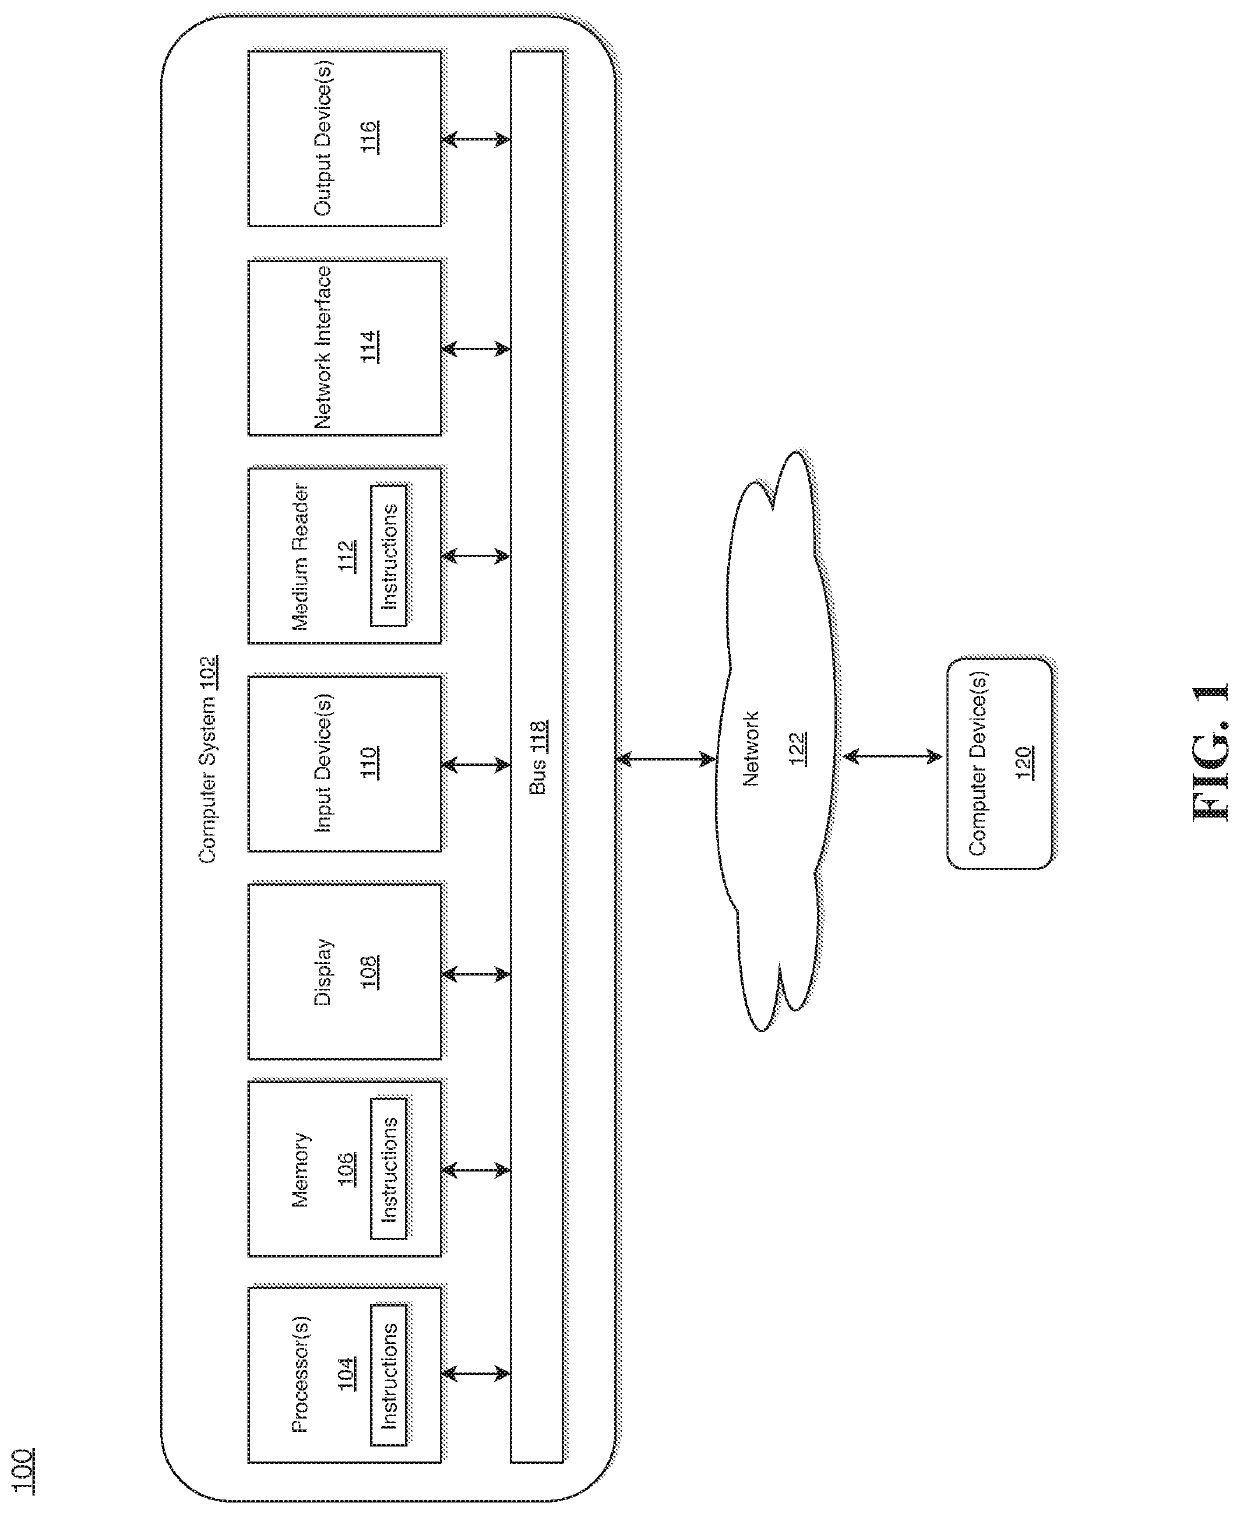 System and method for implementing a vulnerability management module